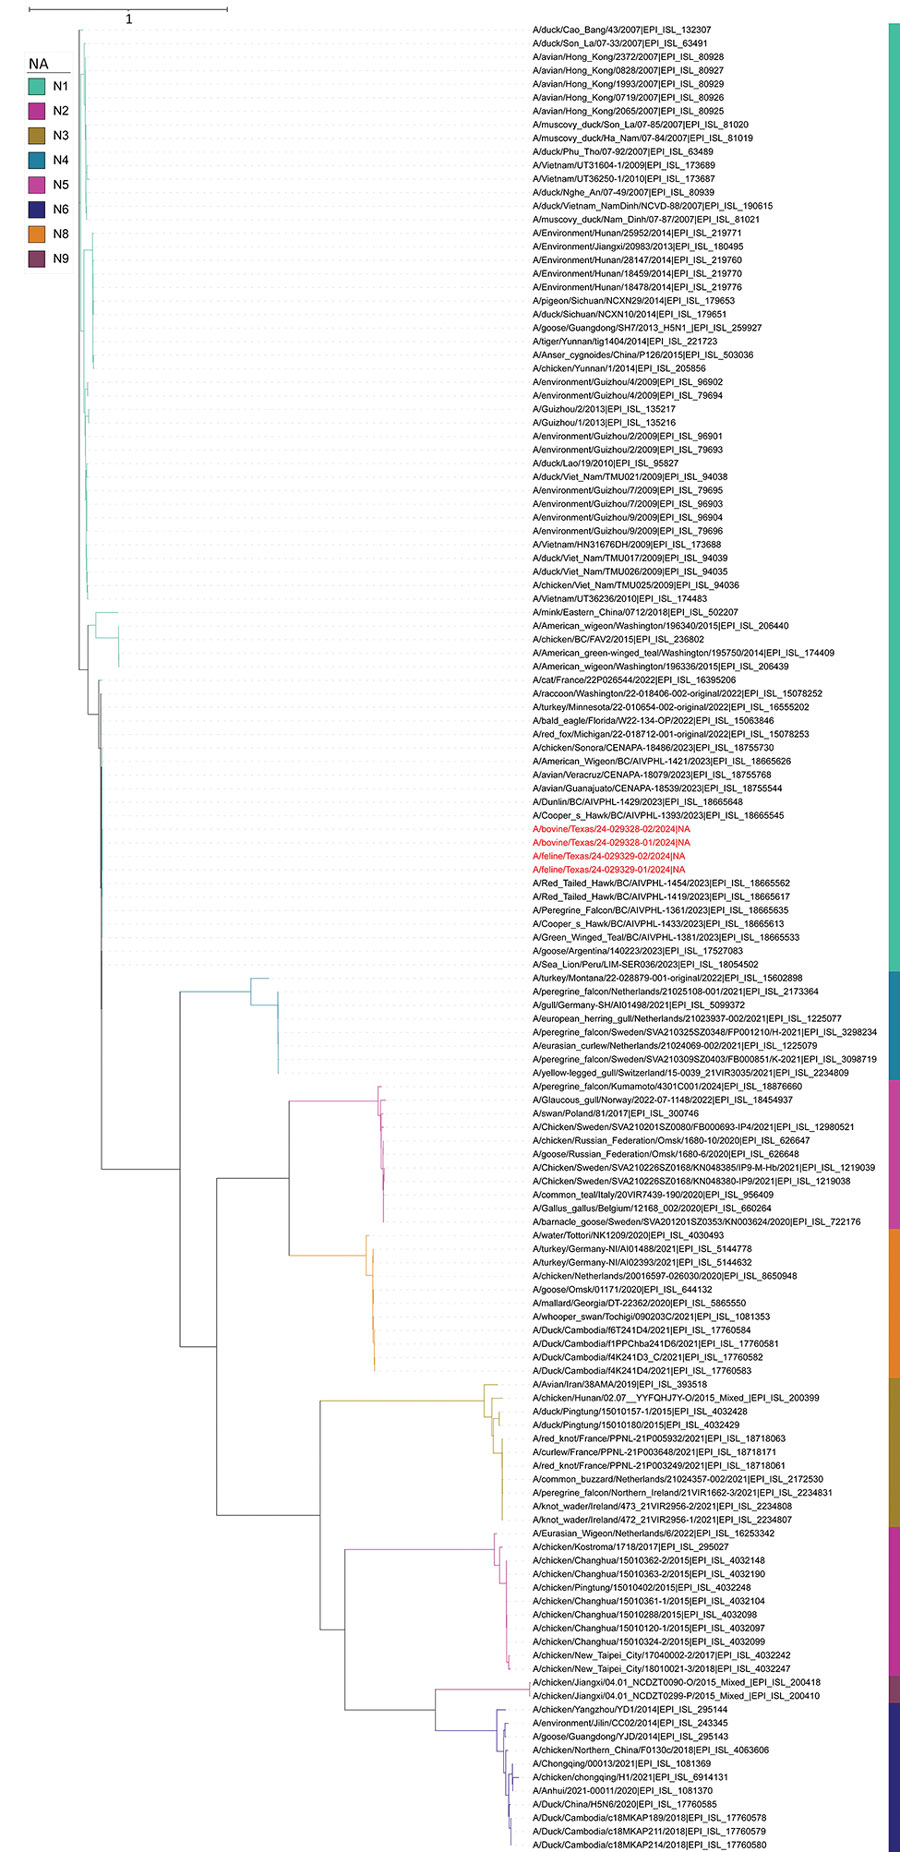 Phylogenetic analysis of neuraminidase gene sequences in study of highly pathogenic avian influenza A(H5N1) clade 2.3.4.4b virus infection in domestic dairy cattle and cats, United States, 2024. Colors indicate different subtypes. Red text indicates the virus gene sequences from bovine milk and cats described in this report, confirming those viruses belong to the N1 subtype. The neuraminidase sequences from this report had 99.52%–99.59% nucleotide identities to sequences from viruses isolated from a chicken and wild birds in 2023.